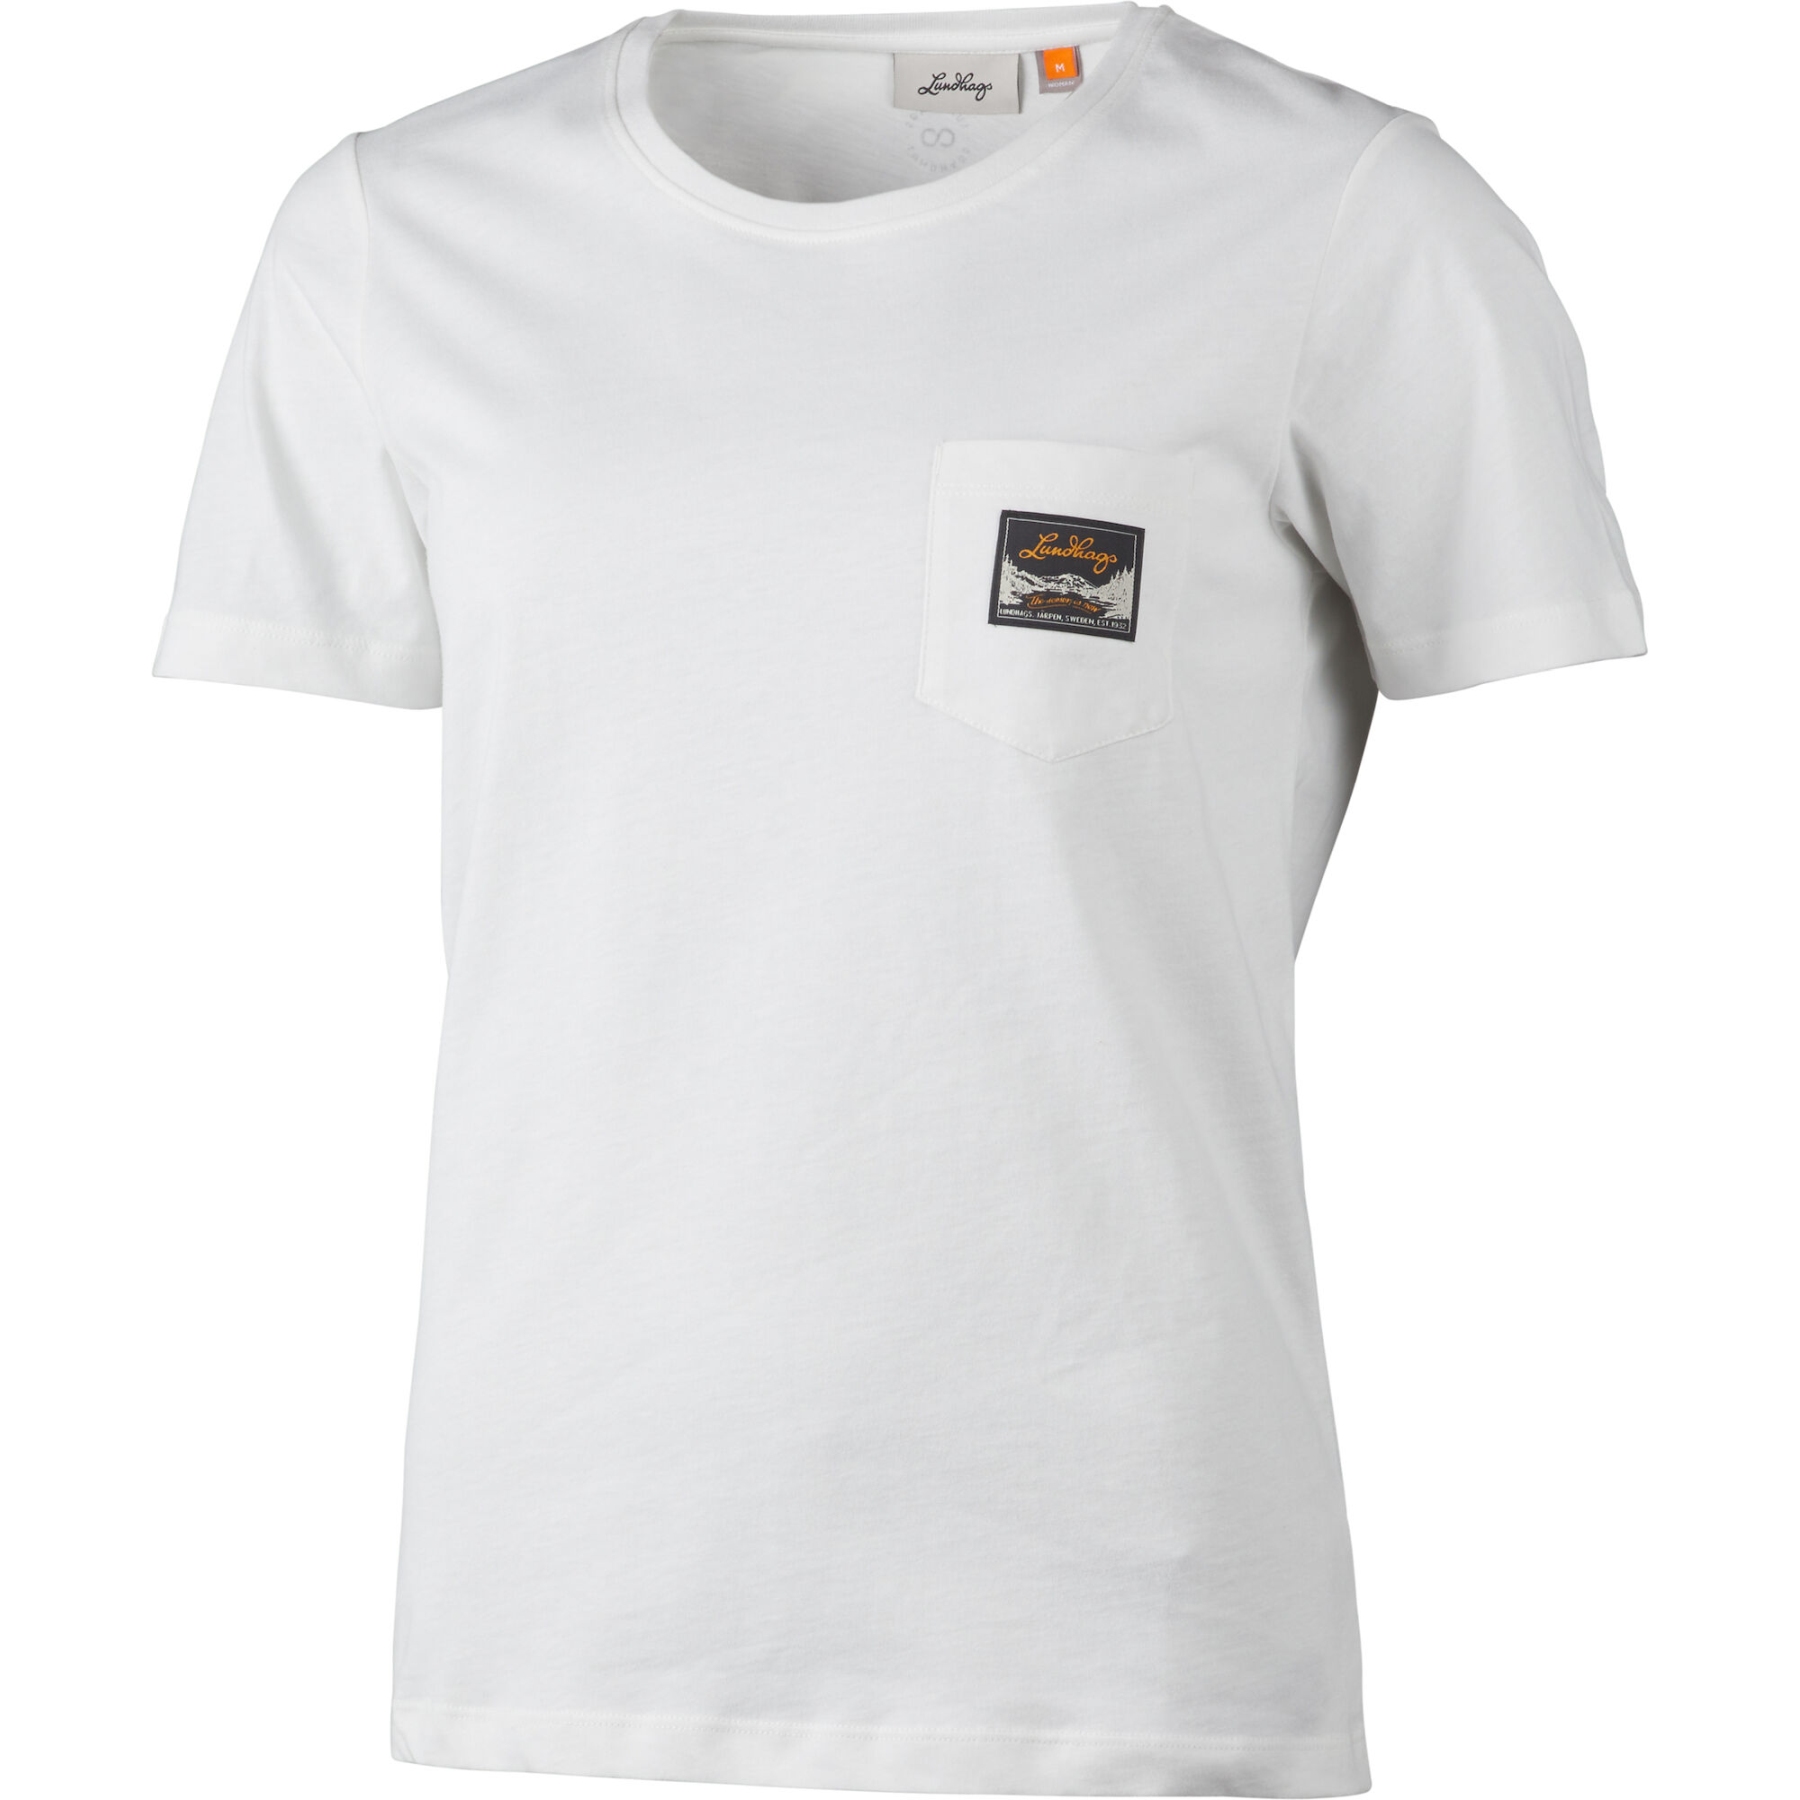 Picture of Lundhags Knak Tee Women - White 100